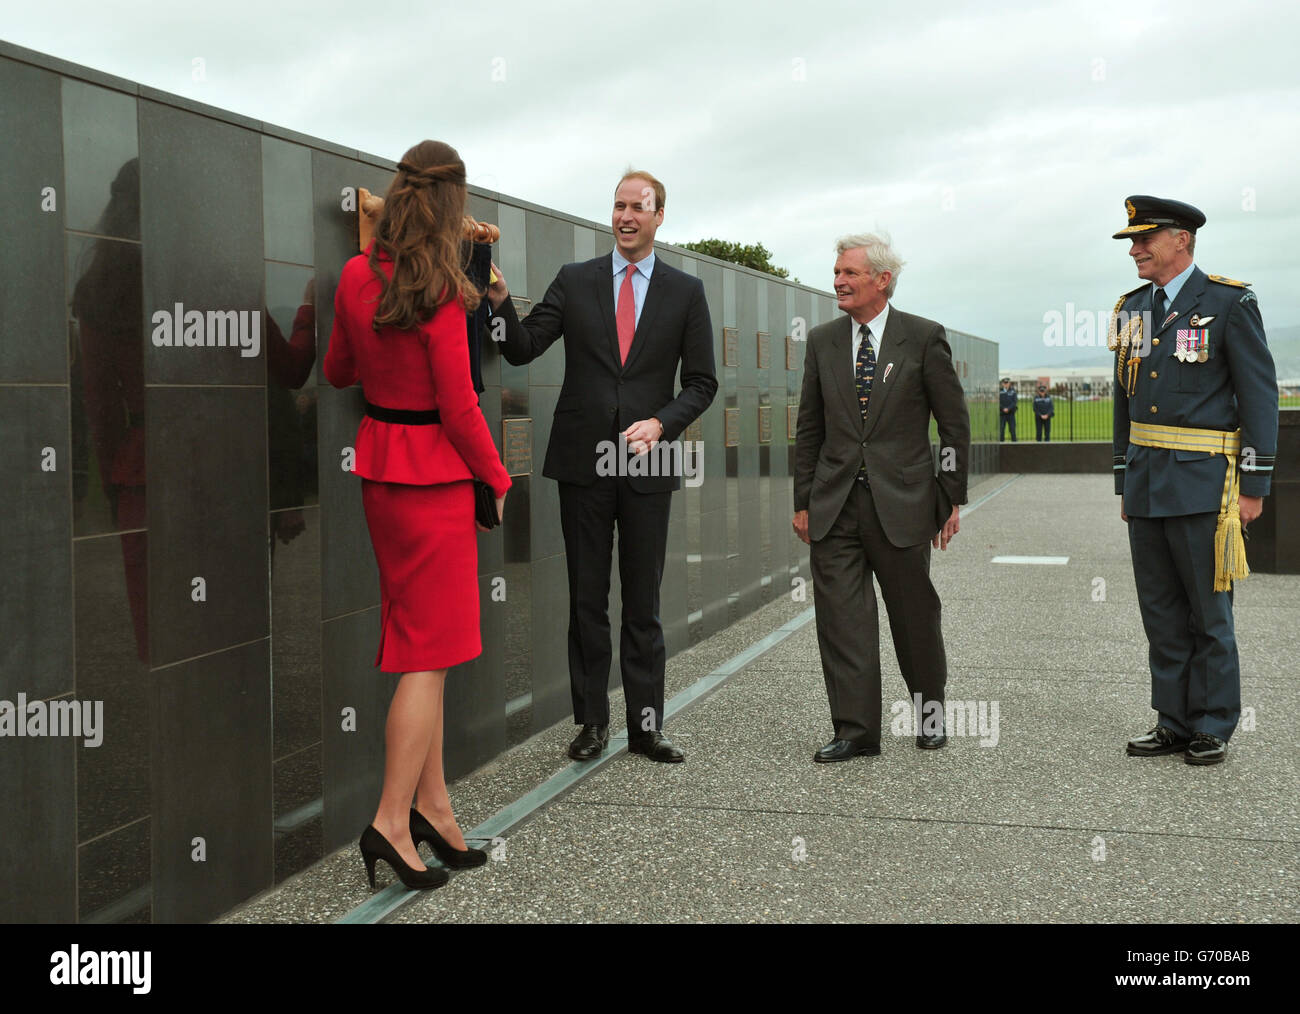 The Duke and Duchess of Cambridge unveil a plaque as they view the RNZAF Memorial Wall at Wigram Air Force Base, Christchurch during the eighth day of their official tour to New Zealand. Stock Photo